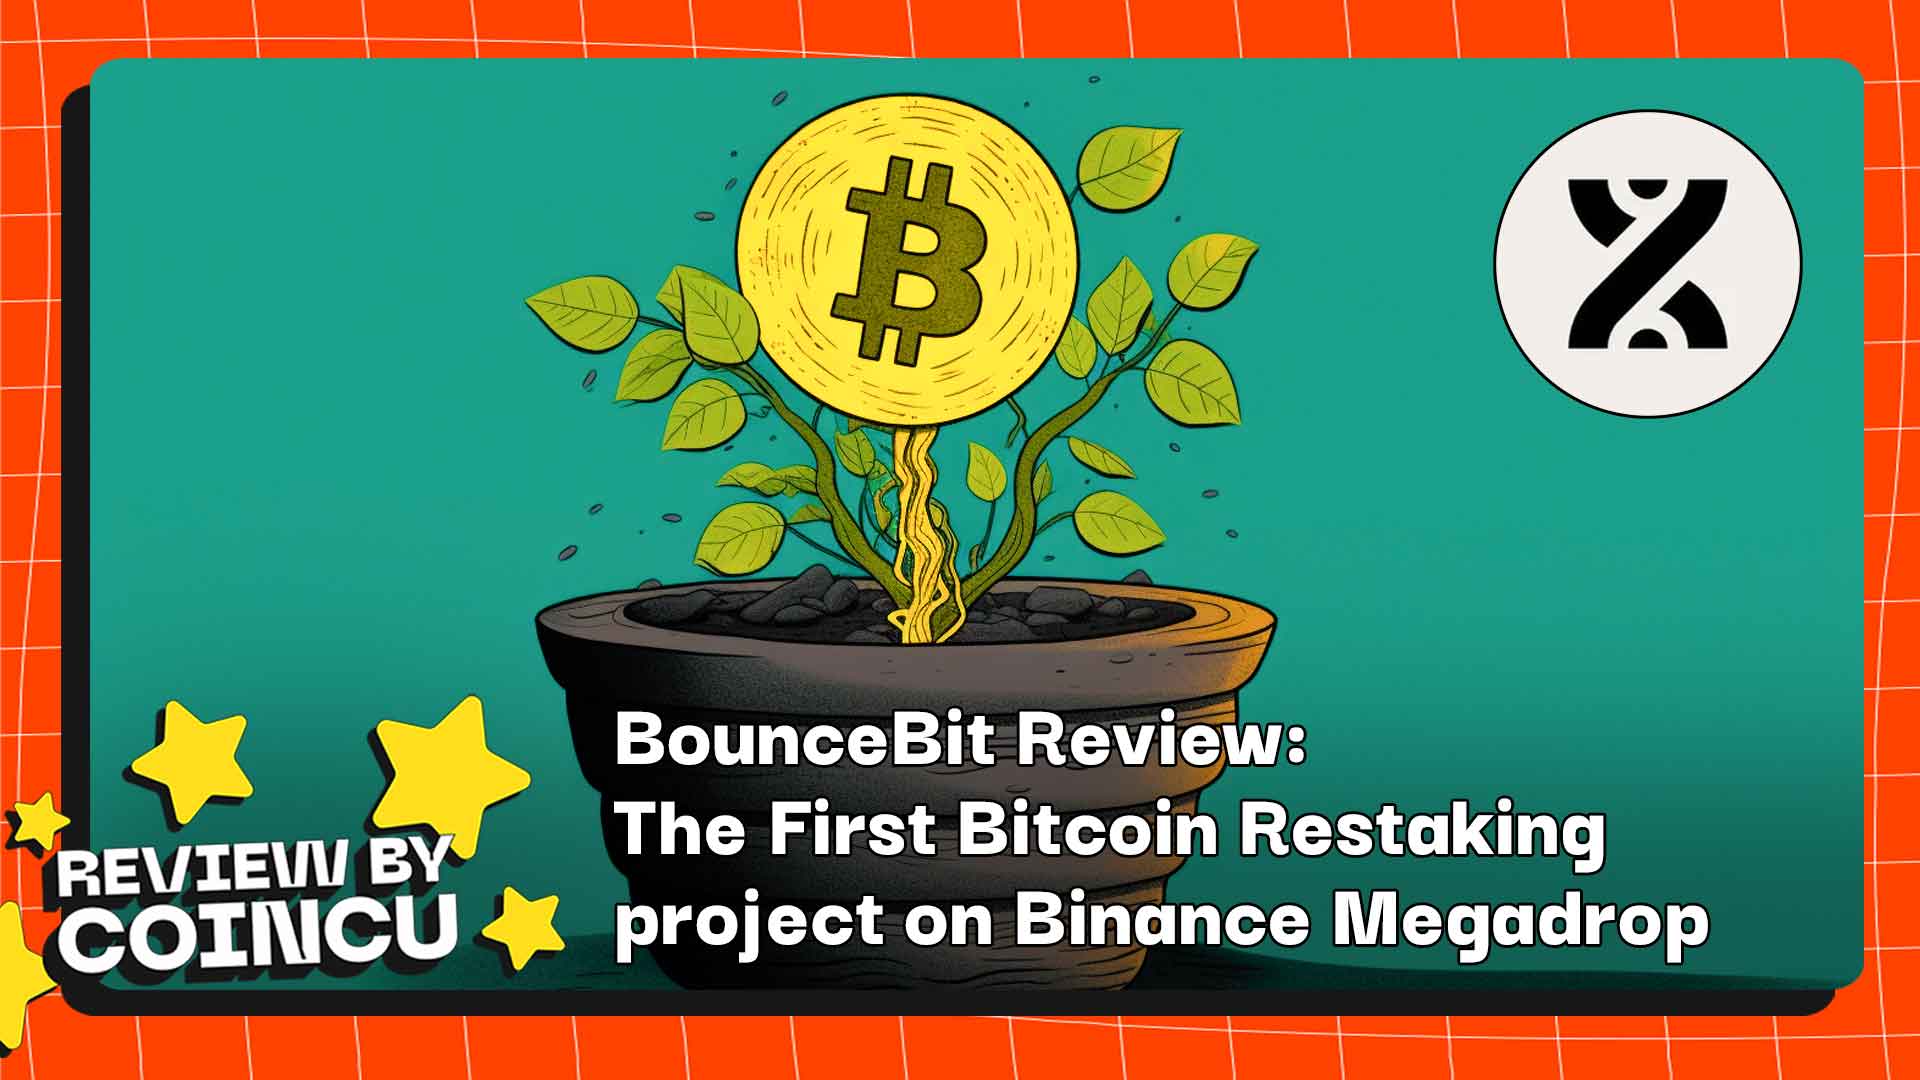 BounceBit Review: The First Bitcoin Restaking project on Binance Megadrop